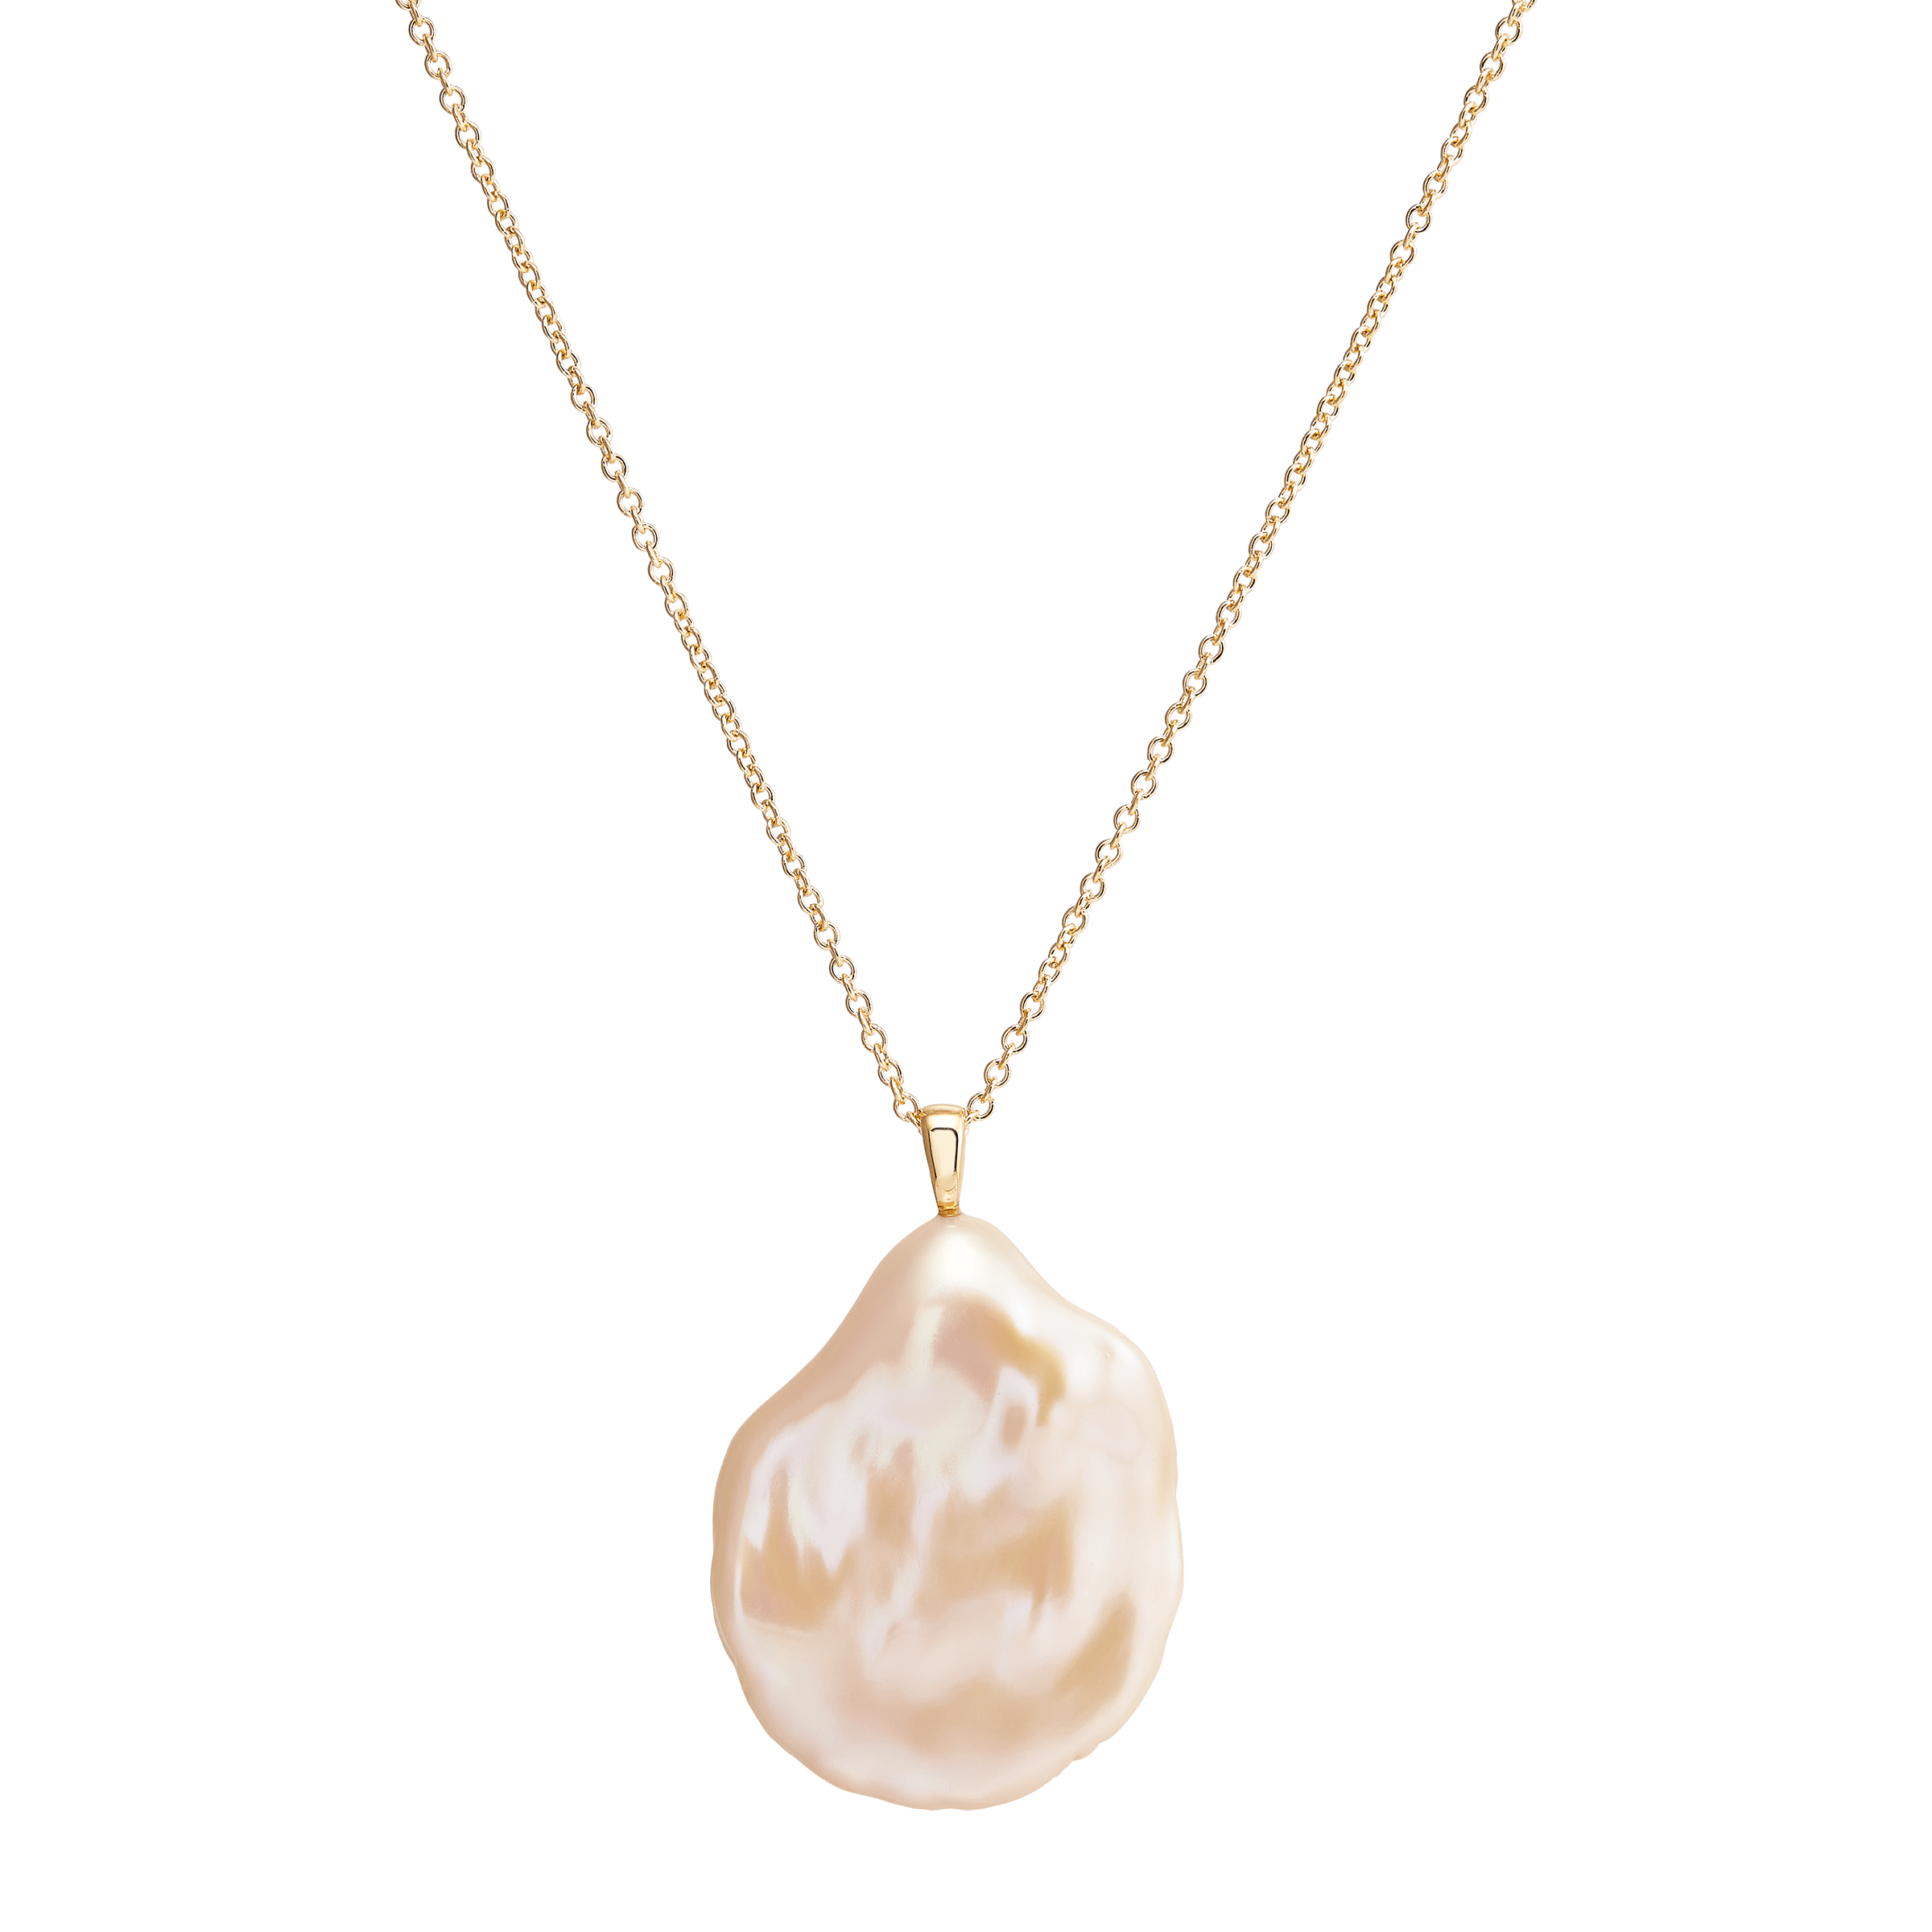 Pre-owned Welry 14k Yellow Gold Keshi-cultured Baroque Pearl Pendant Necklace, 18" In Pink